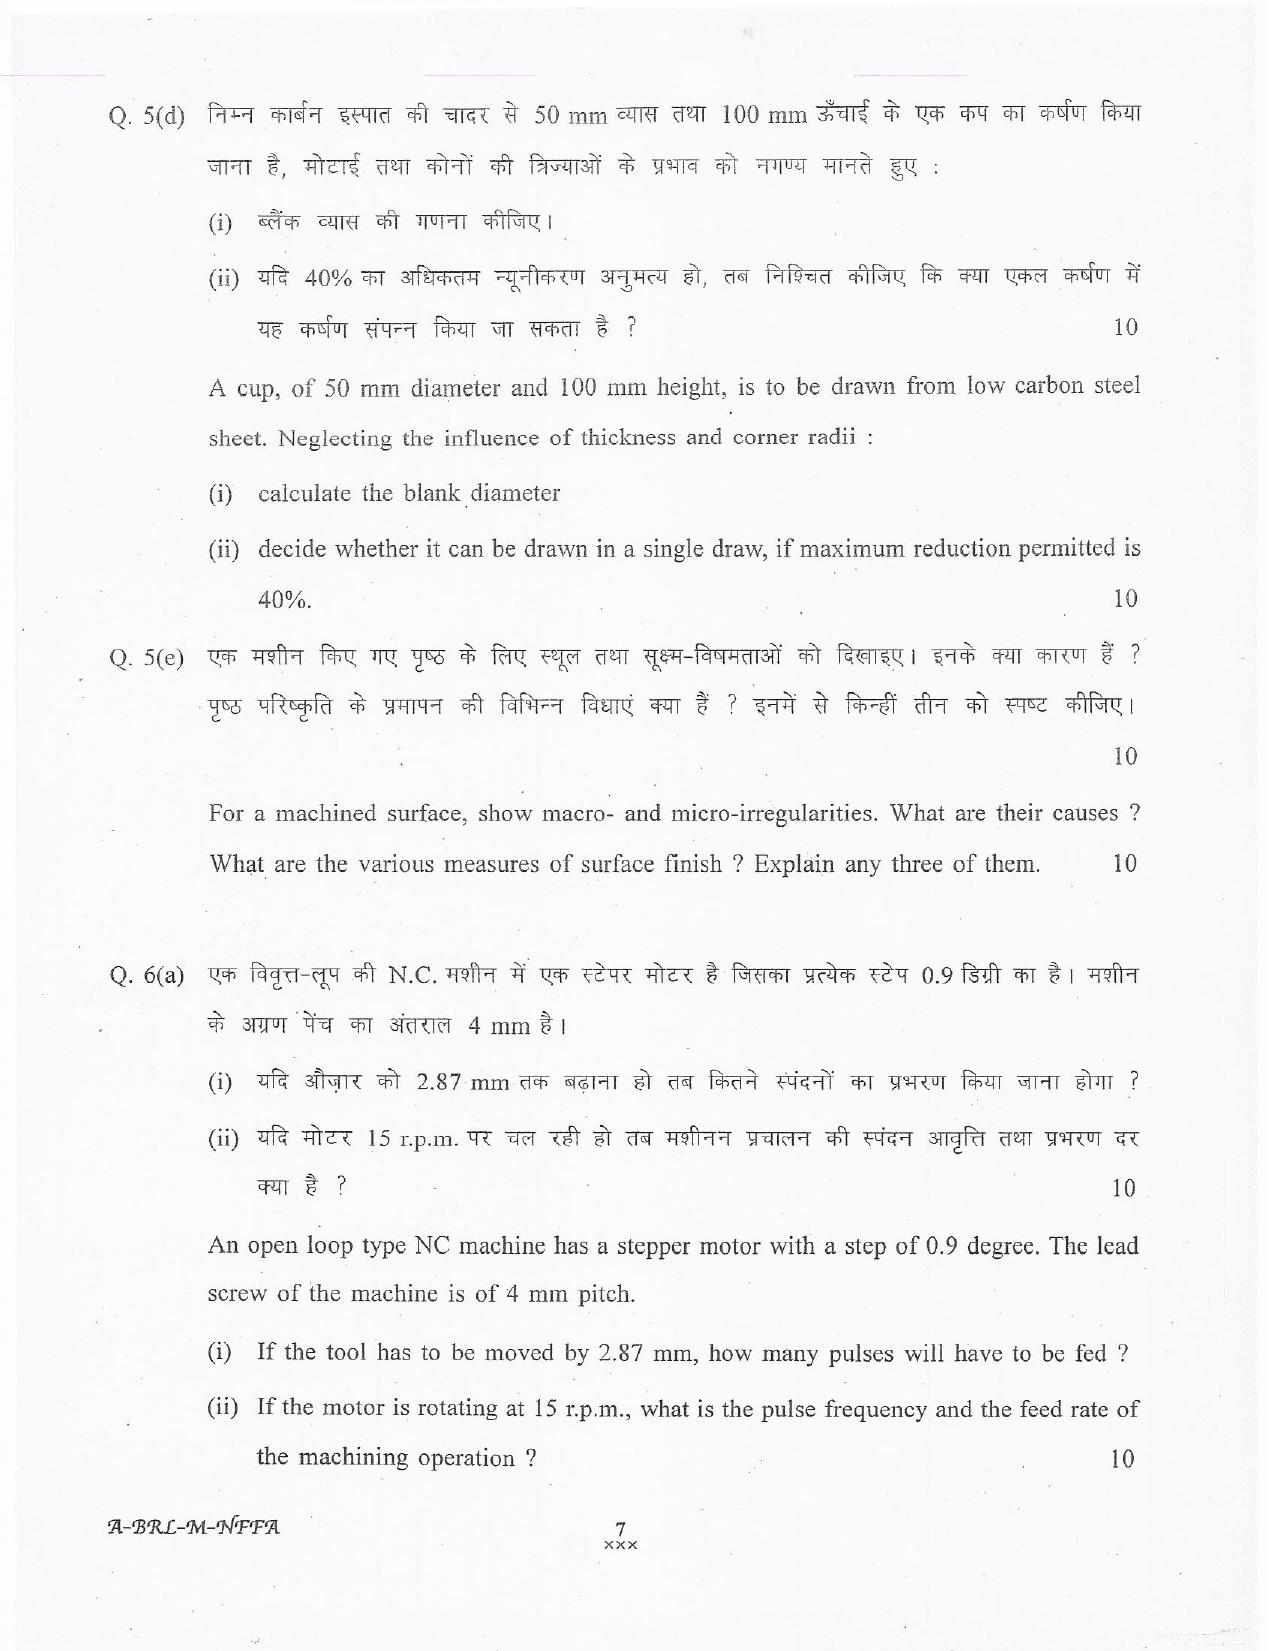 lakshadweep.gov.in Mechanical Engineering Question Papers - Page 7